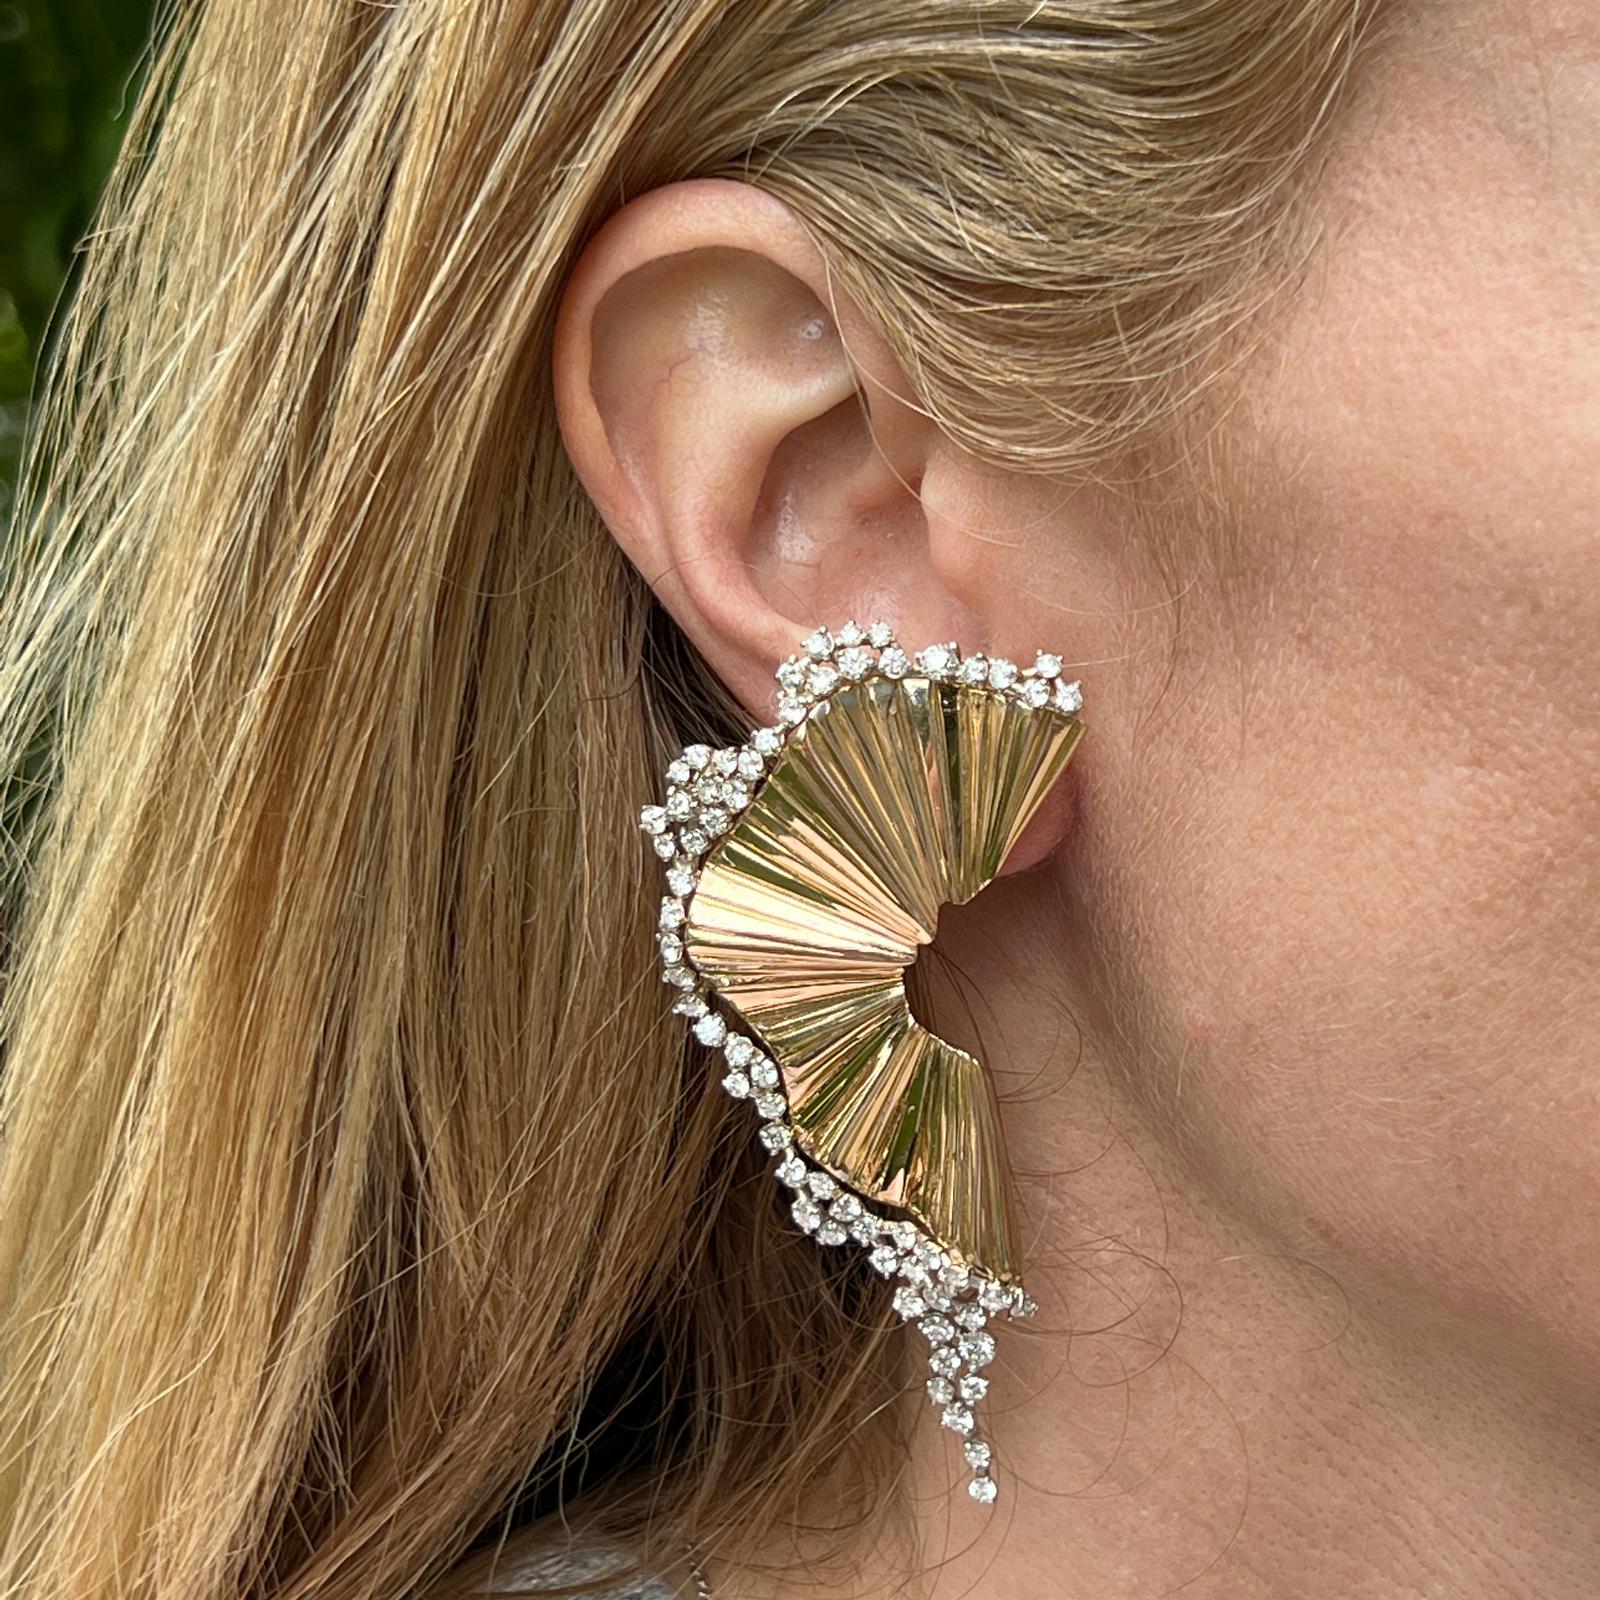 Diamond fan statement earrings handcrafted in 18 karat yellow gold. The earrings feature 120 round brilliant cut diamonds weighing approximately 6.00 CTW and graded H-I color and VS clarity. The earrings measure 1.25 x 3.00 inches, leverback clip